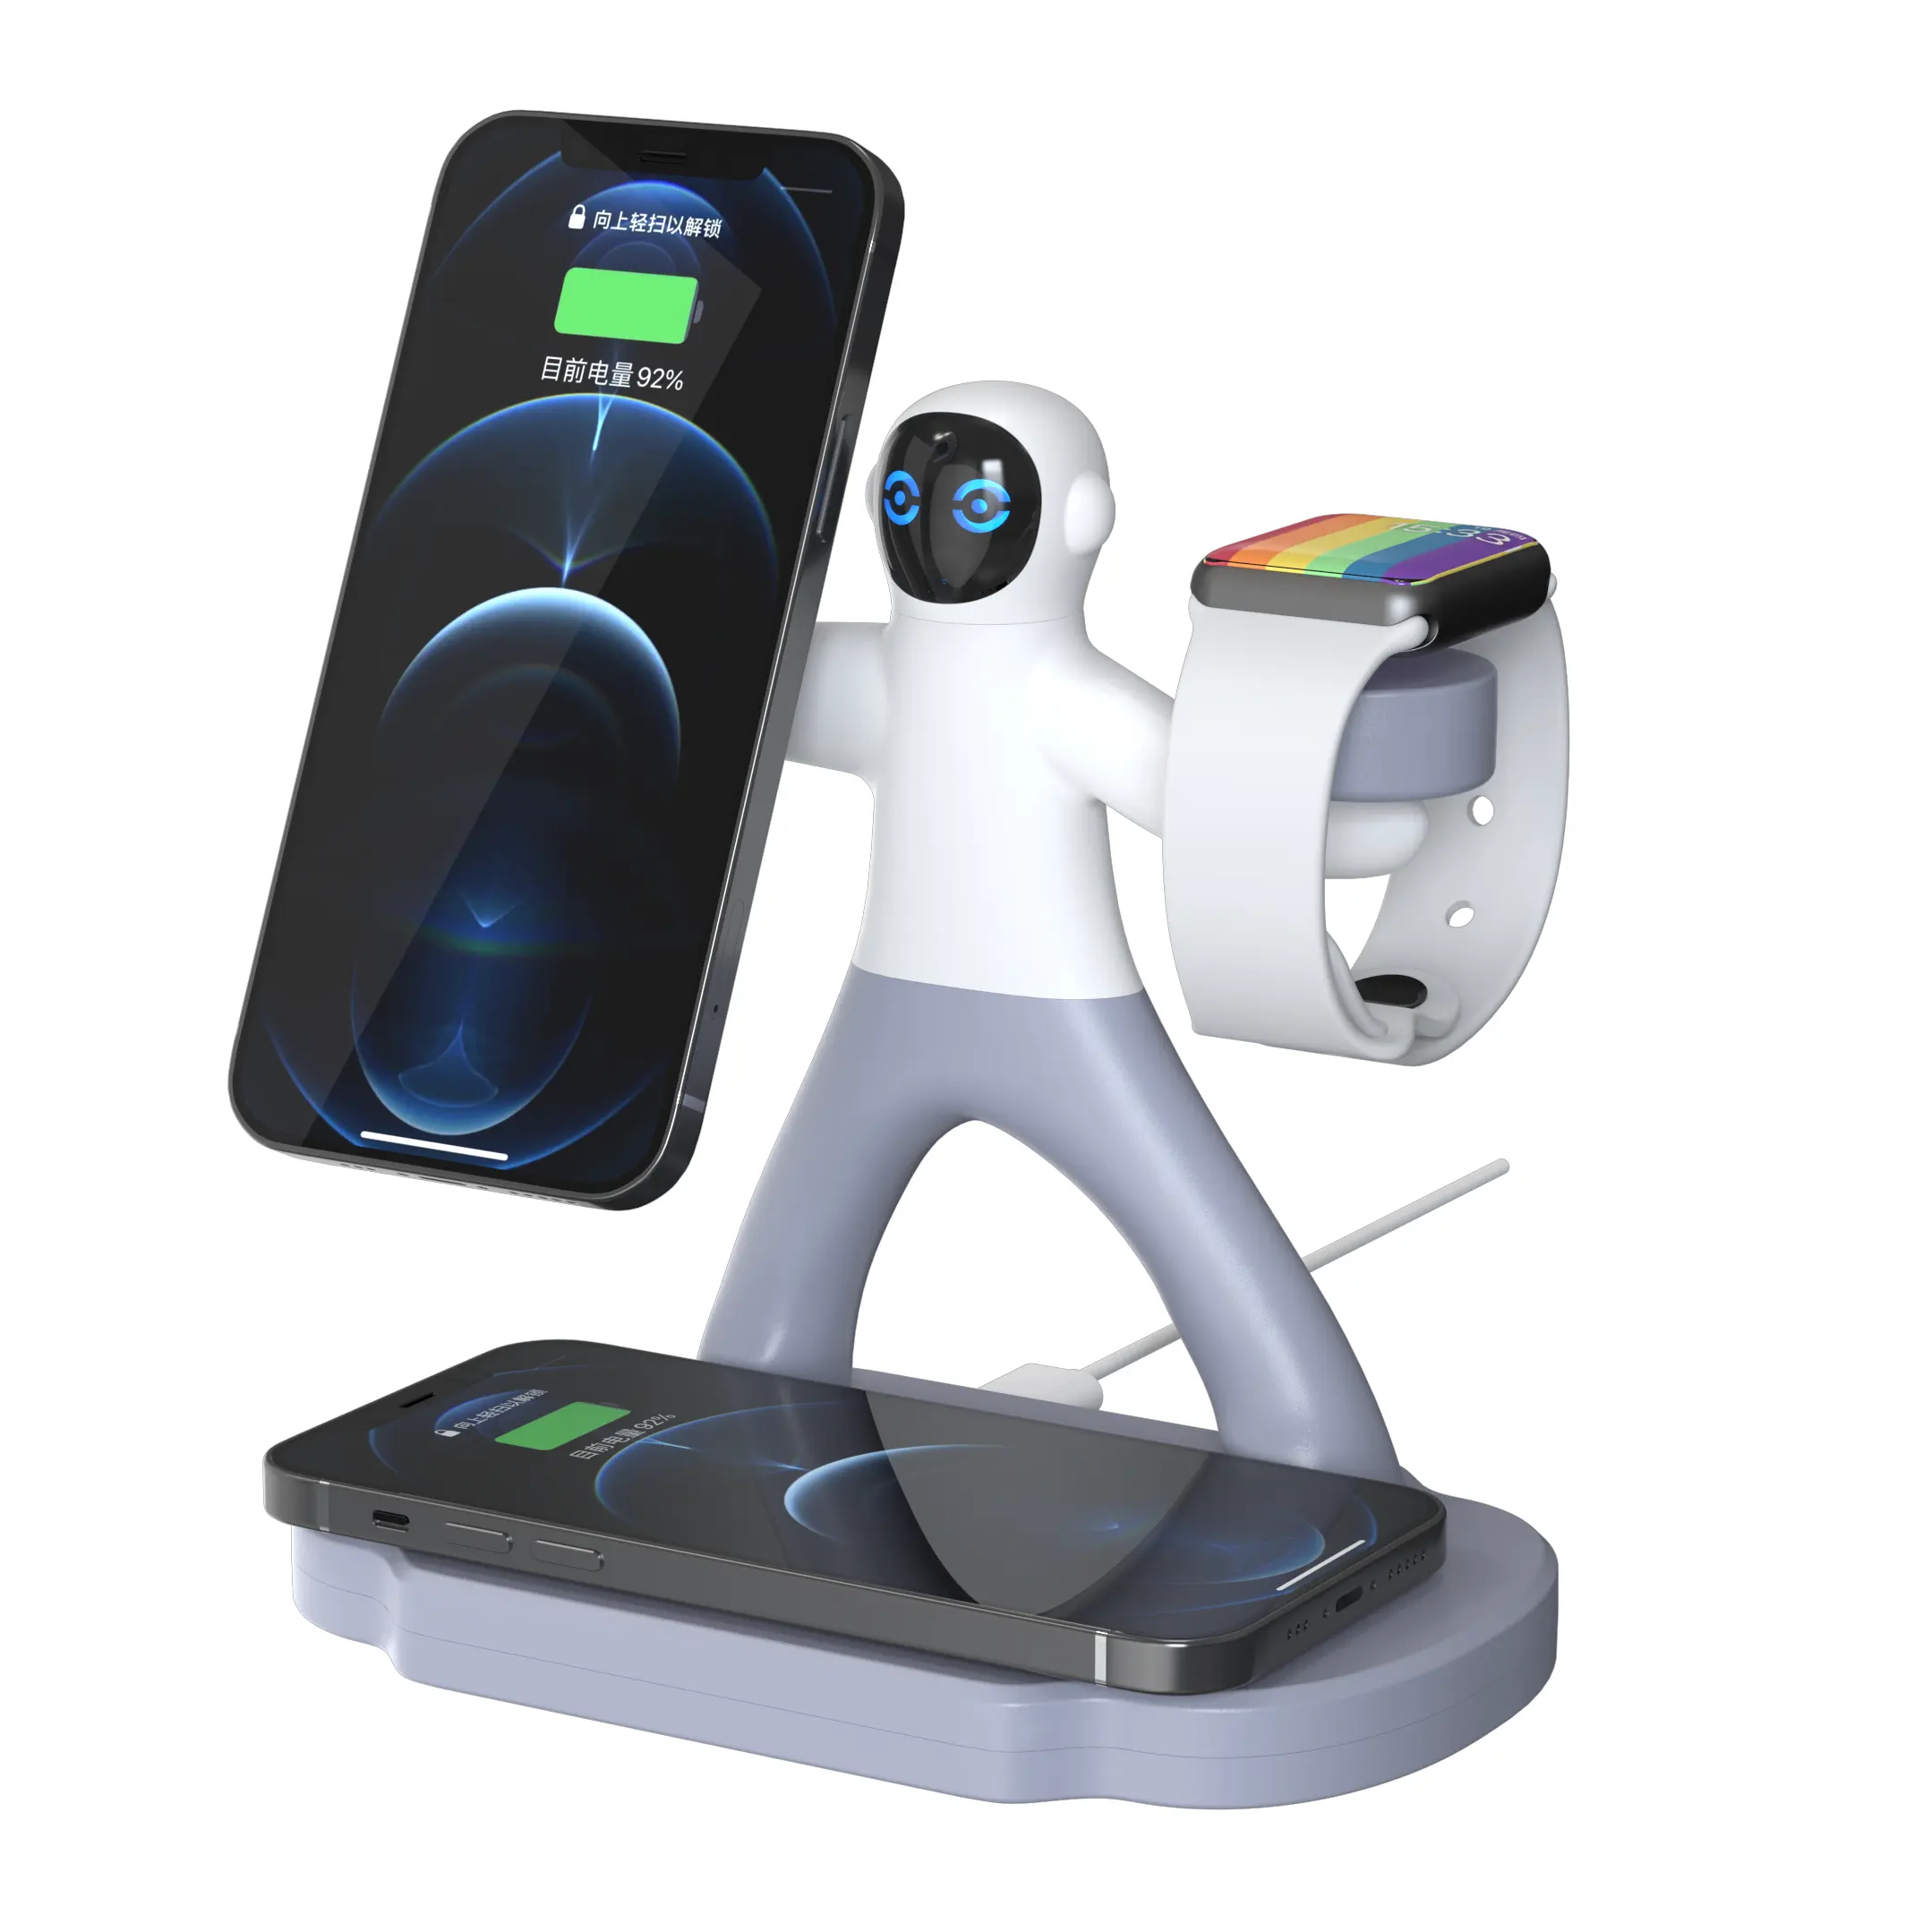 TH-03 THXY SpaceMan Robot Design Phone Holder 15W Magnetic Wireless Charger 3 in 1 for iPhone 13 Apple